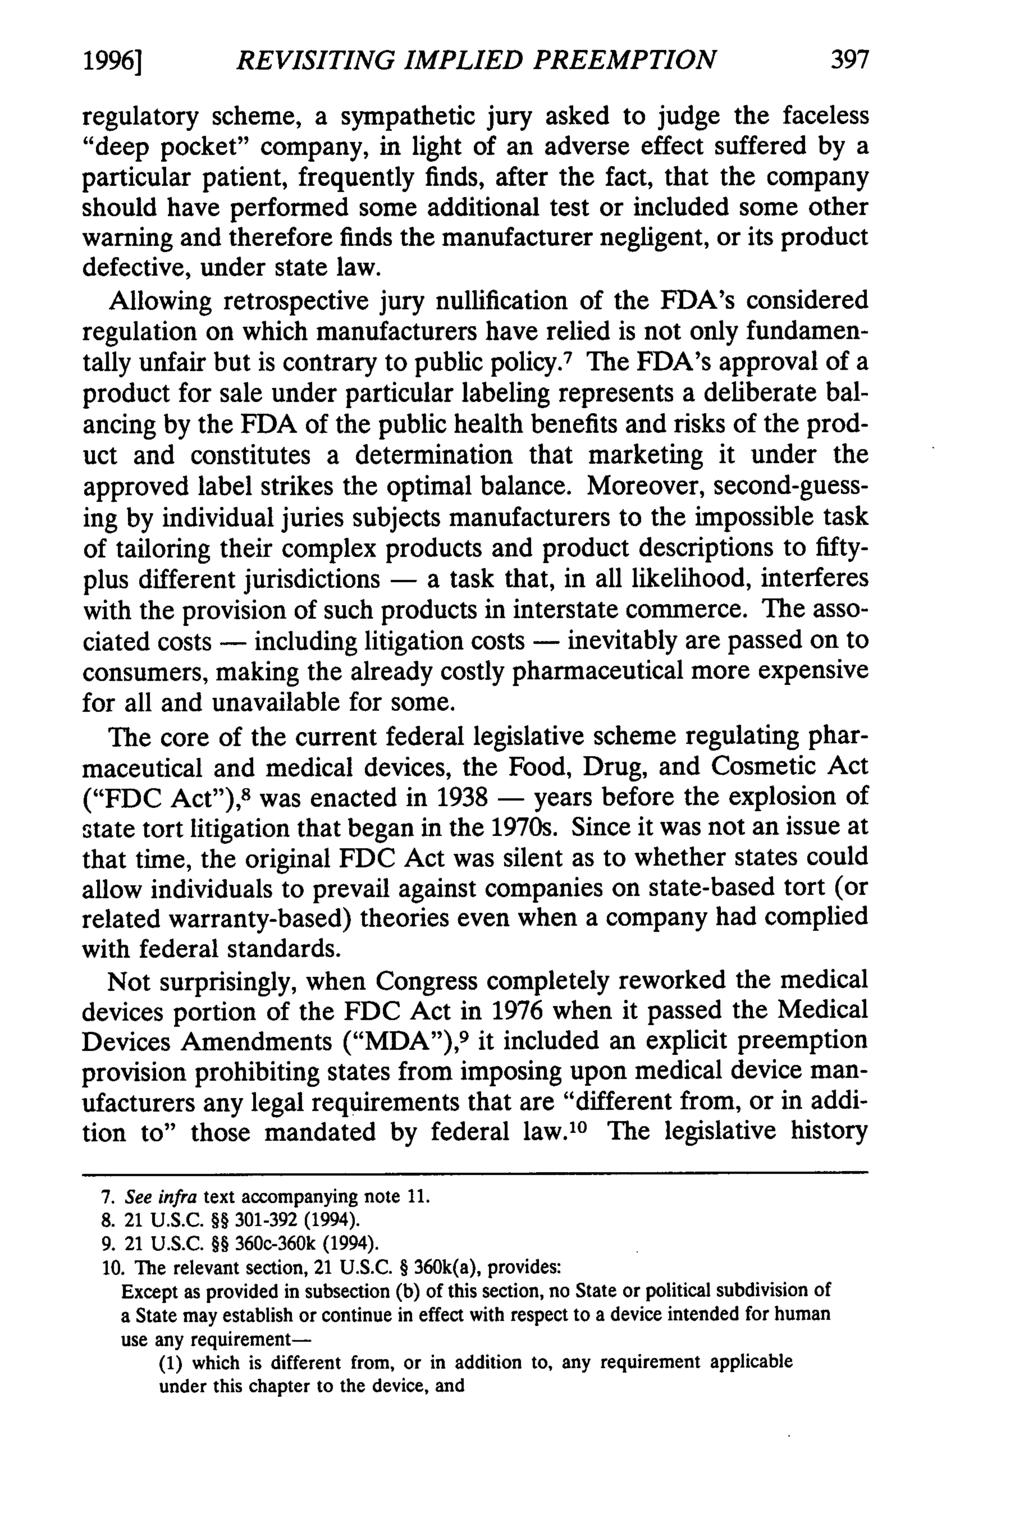 1996] REVISITING IMPLIED PREEMPTION regulatory scheme, a sympathetic jury asked to judge the faceless "deep pocket" company, in light of an adverse effect suffered by a particular patient, frequently